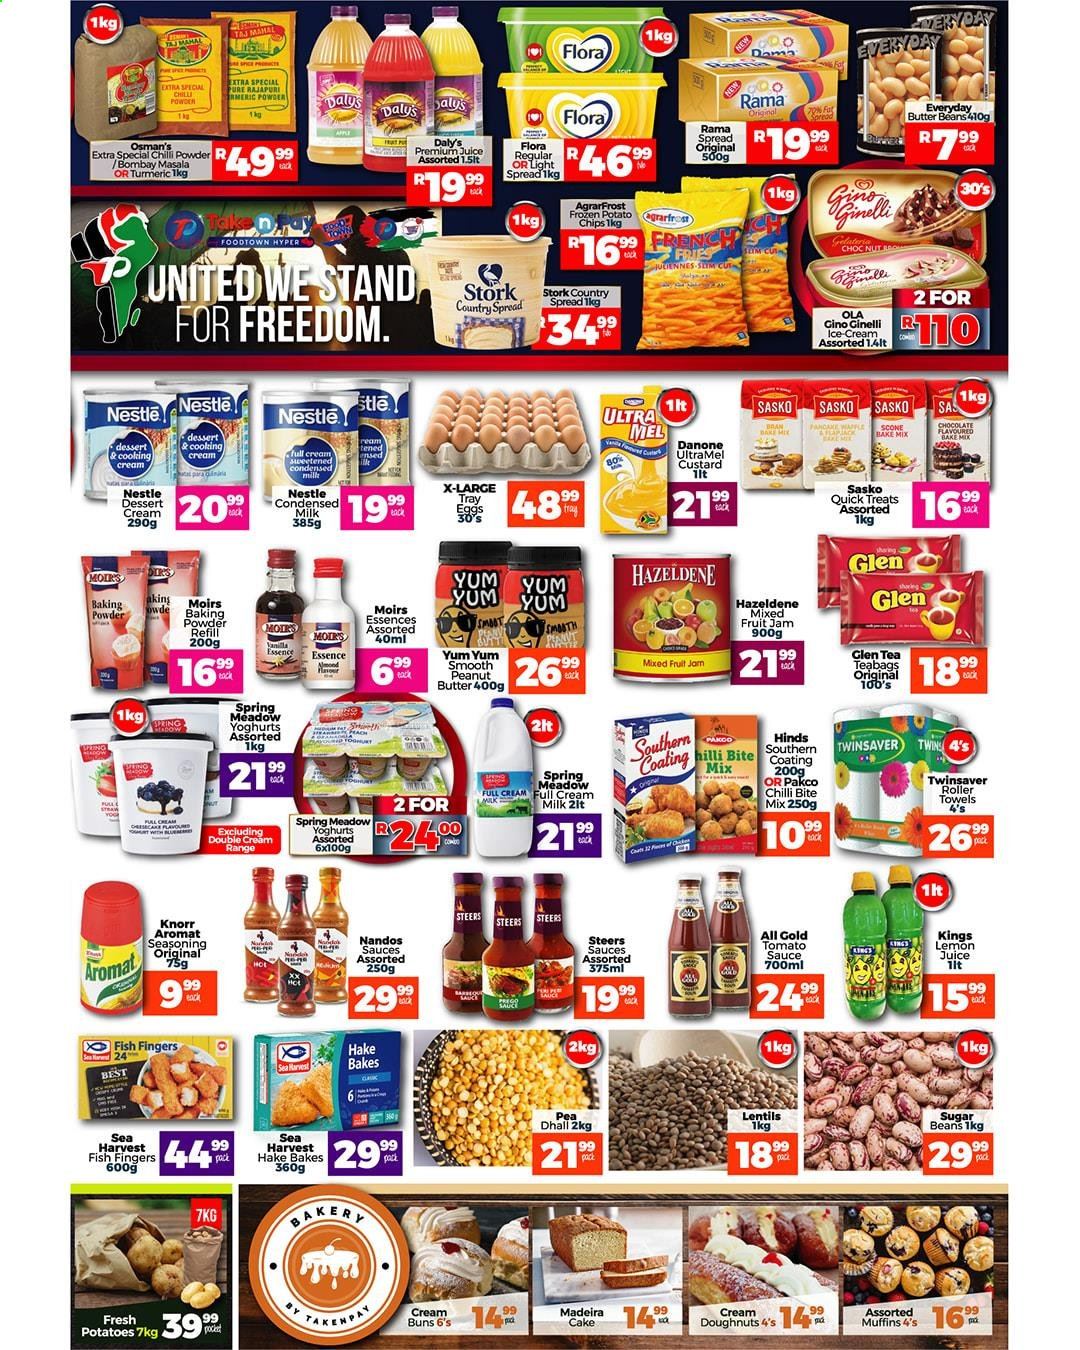 Take n Pay specials - 06.01.2021 - 06.06.2021. 